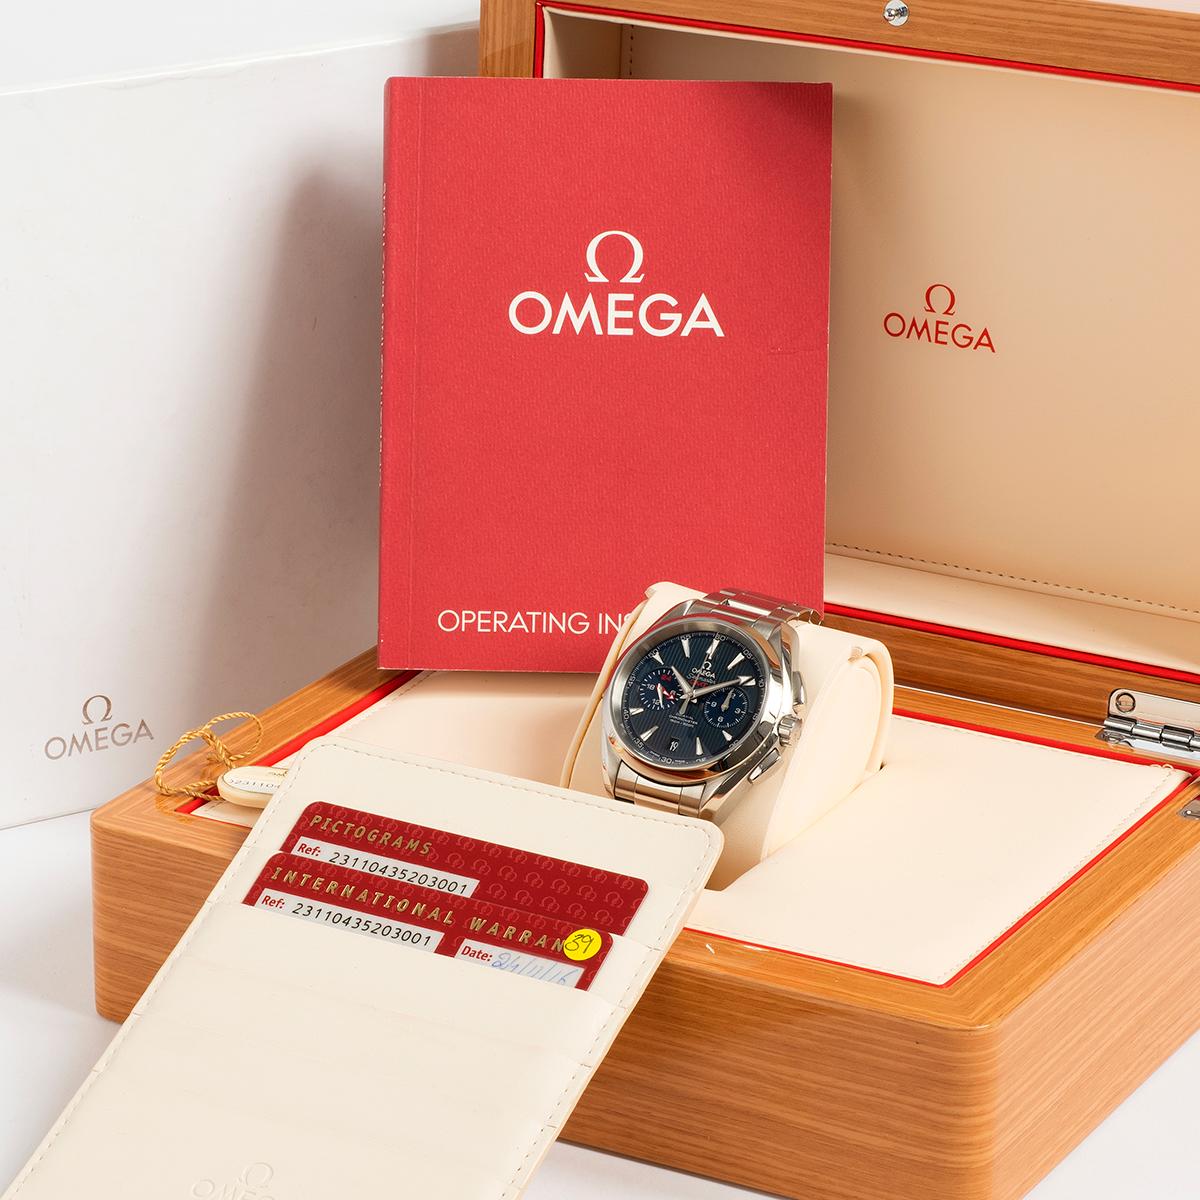 Our Omega Seamaster Aqua Terra GMT Chronograph reference 231.10.43.52.03.001 features a 43mm stainless steel case, stainless steel bracelet, blue dial (teak effect, to evoke luxury yacht decks), and has chronograph, date and GMT functions. Presented